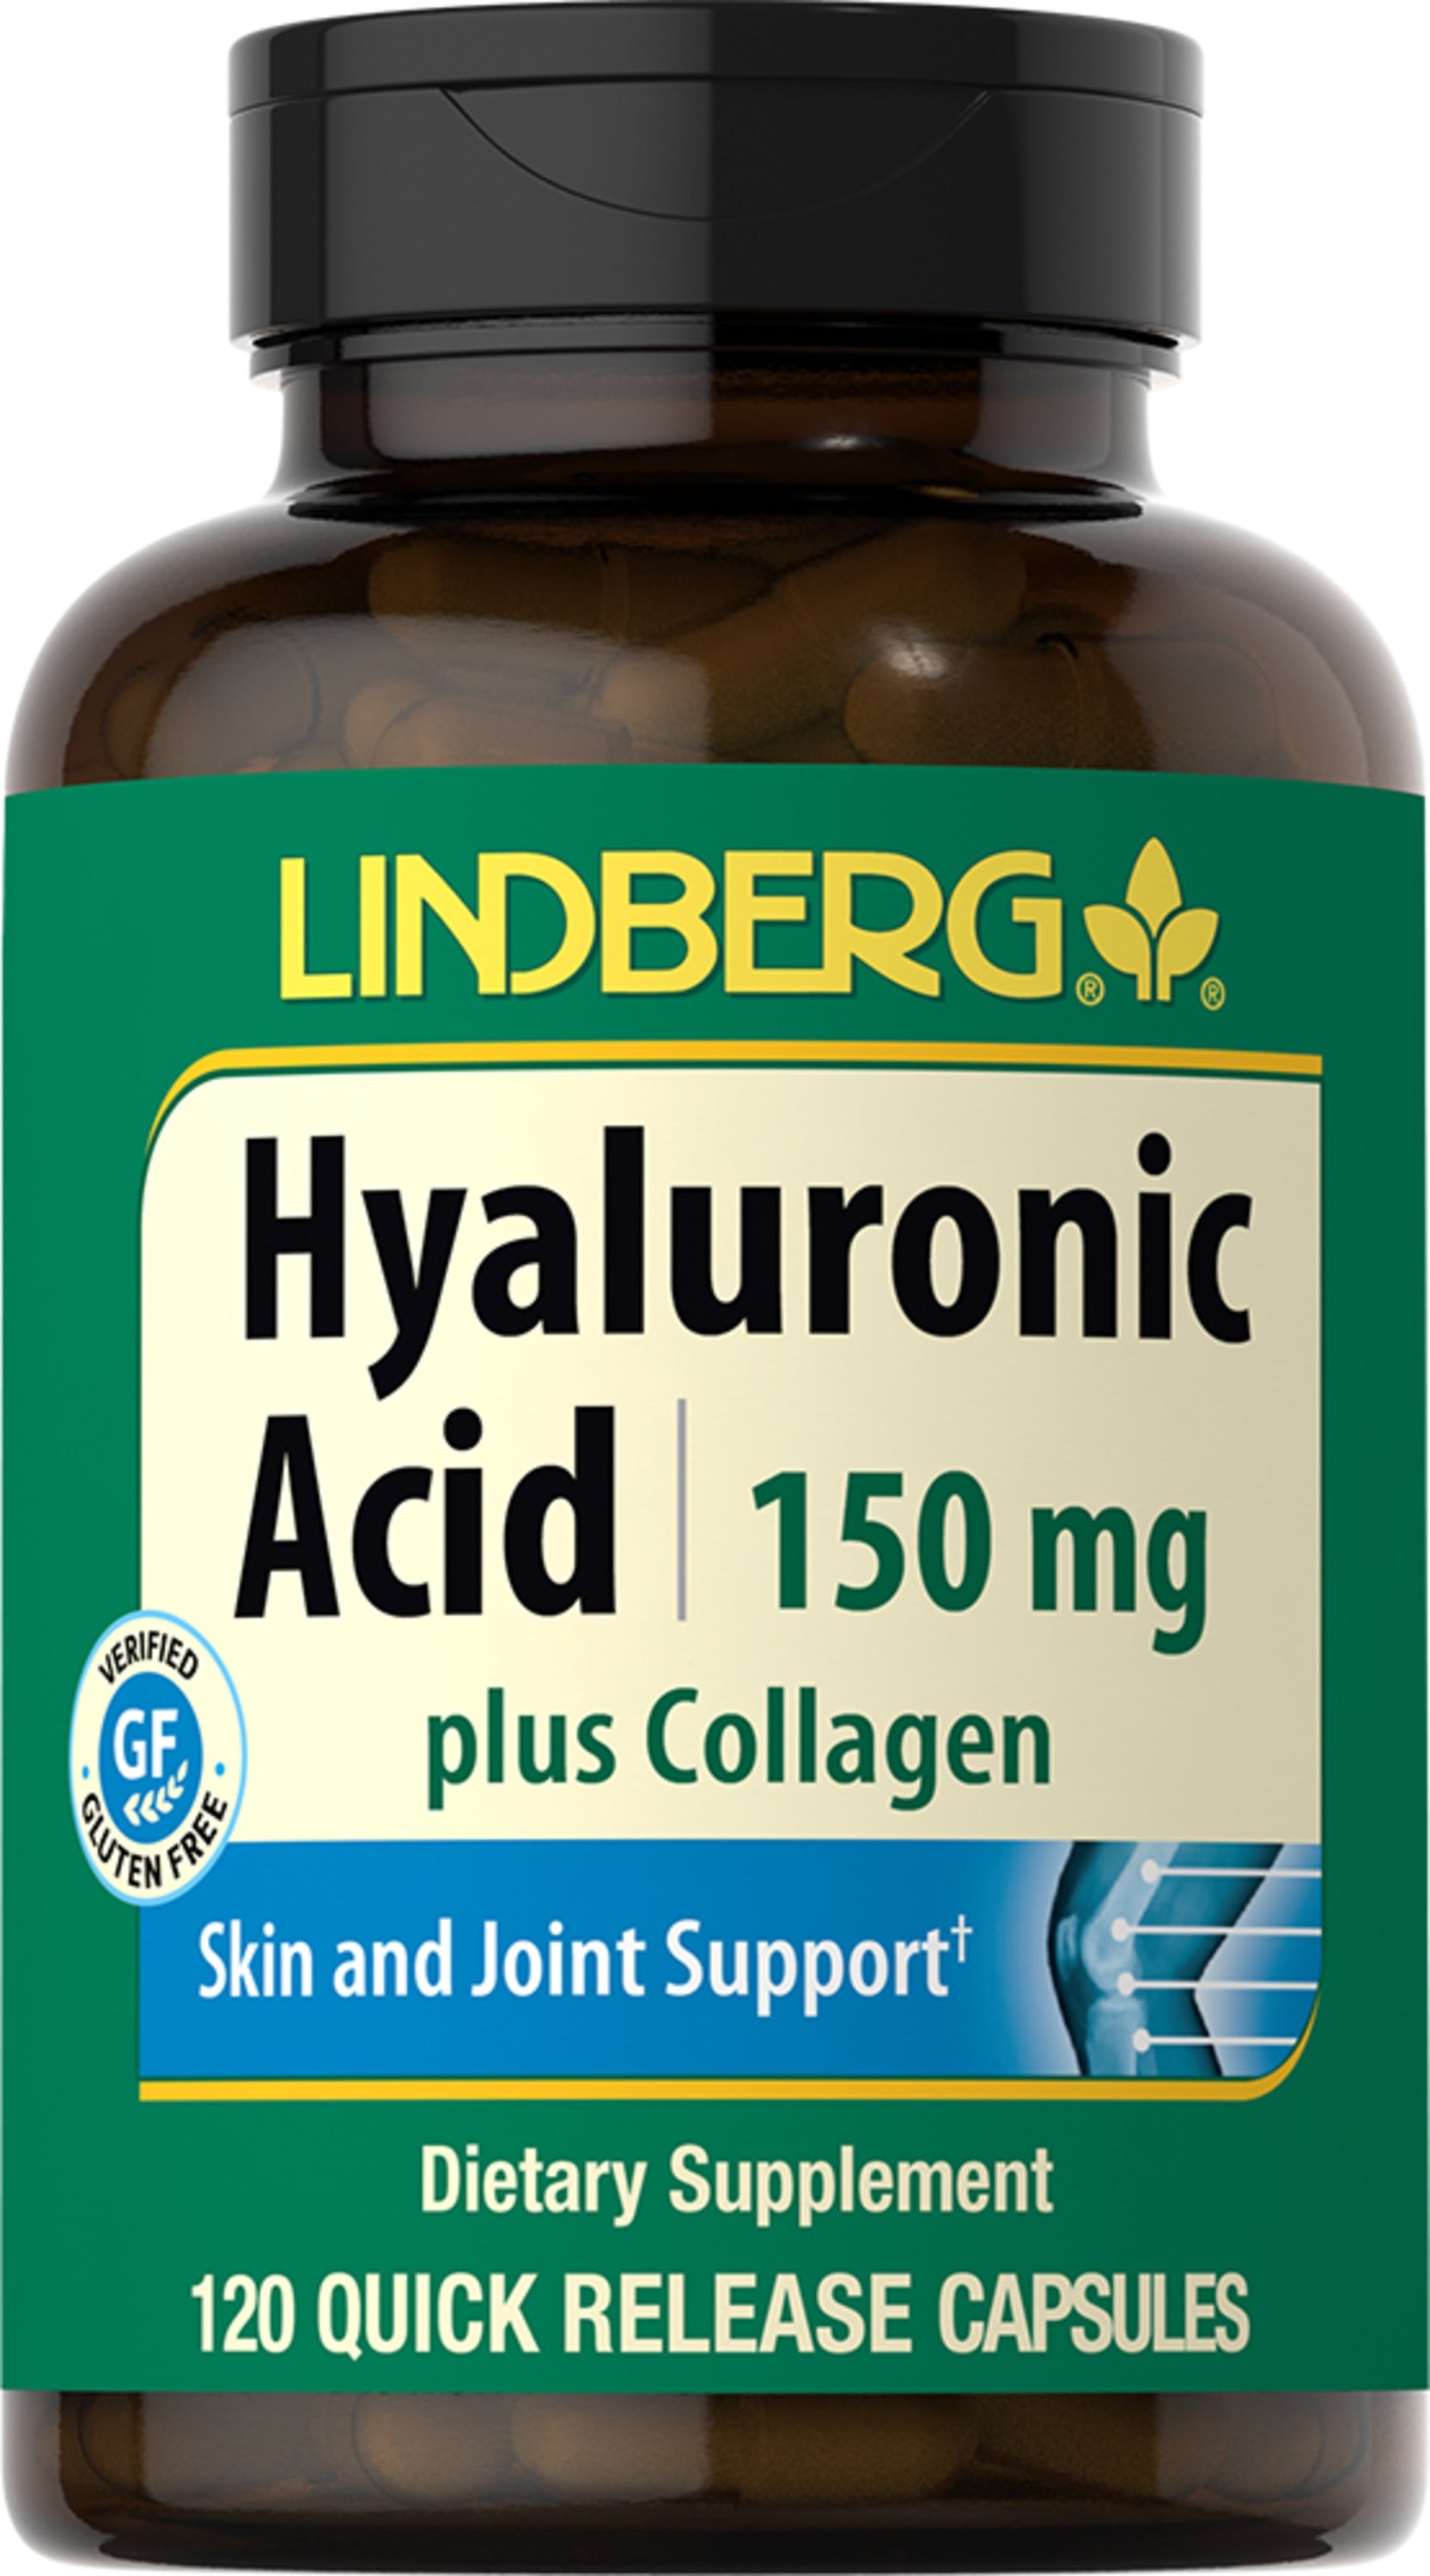 Hyaluronic Acid Plus Collagen, 150 mg, 120 Quick Release Capsules